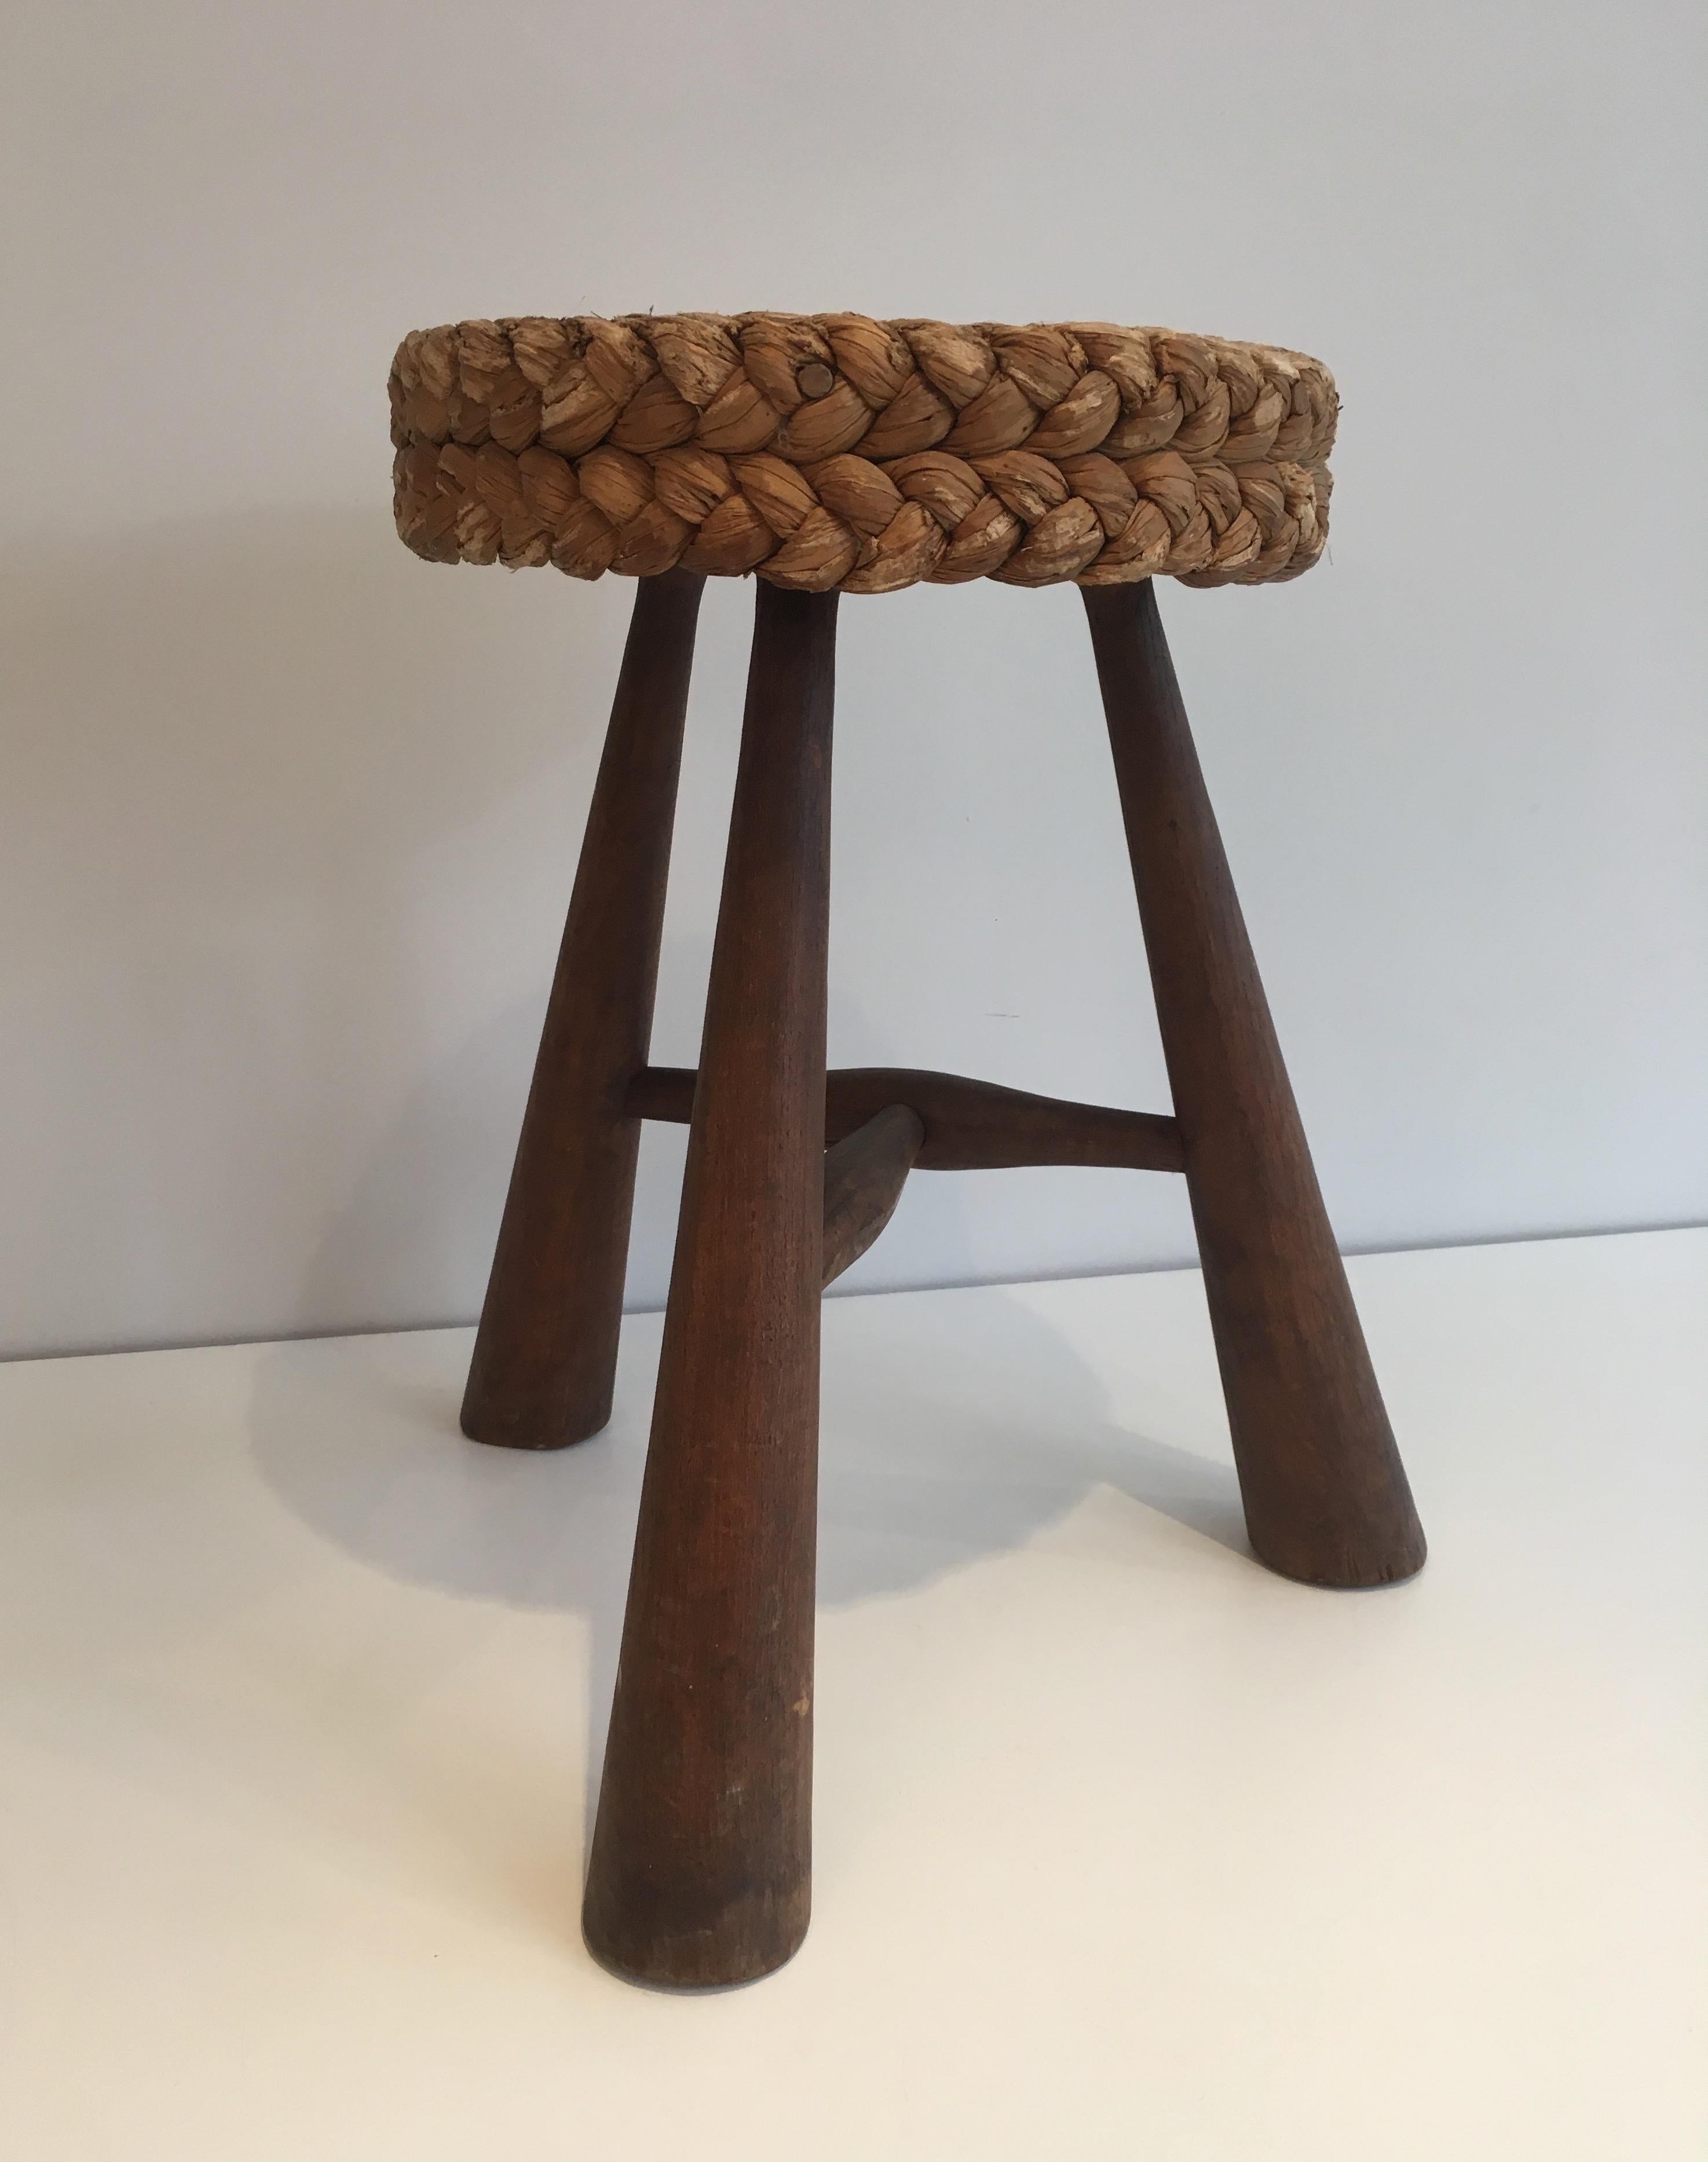 Mid-20th Century Audoux Minet, Wood and Rope Stool, French, circa 1950